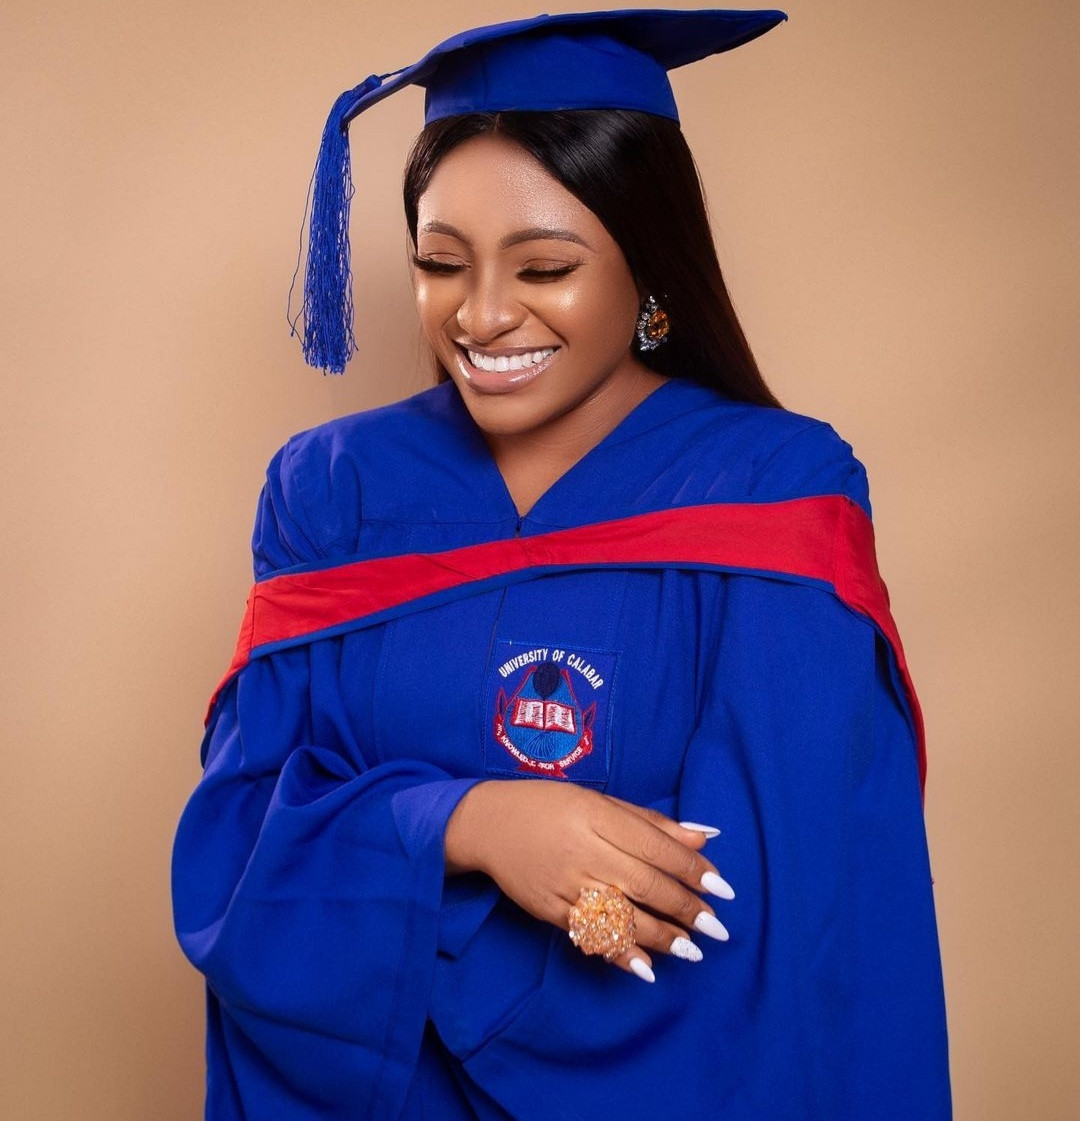 Nursing mum who sat for exam while heavily pregnant becomes first and only graduate with First Class in her department's history in Unical